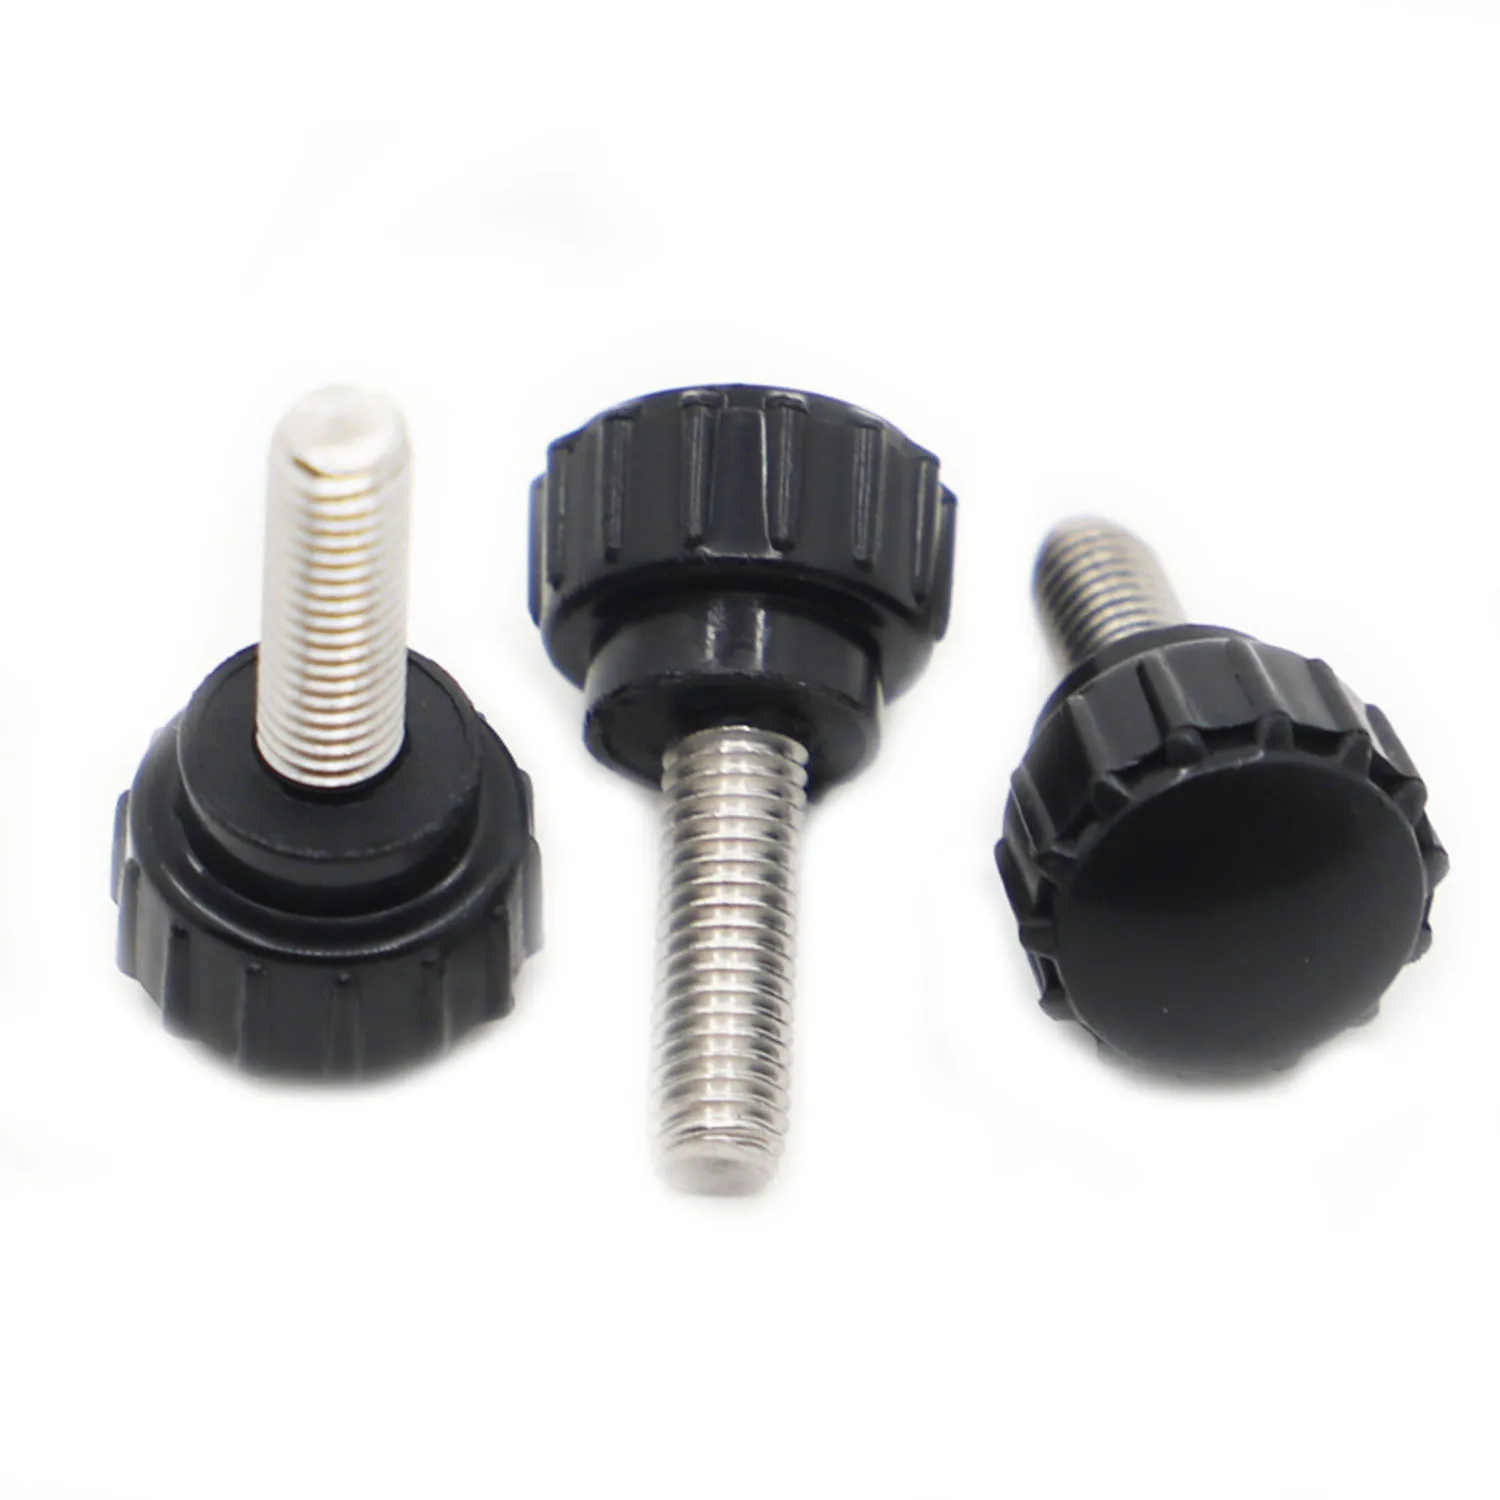 

Round Head Handle Hand Screw Round Knurled Rubber Thumb Screw M3 M4 M5 M6 M8 Plastic Tighten Bolt Nuts Knob 304 Stainless Steel